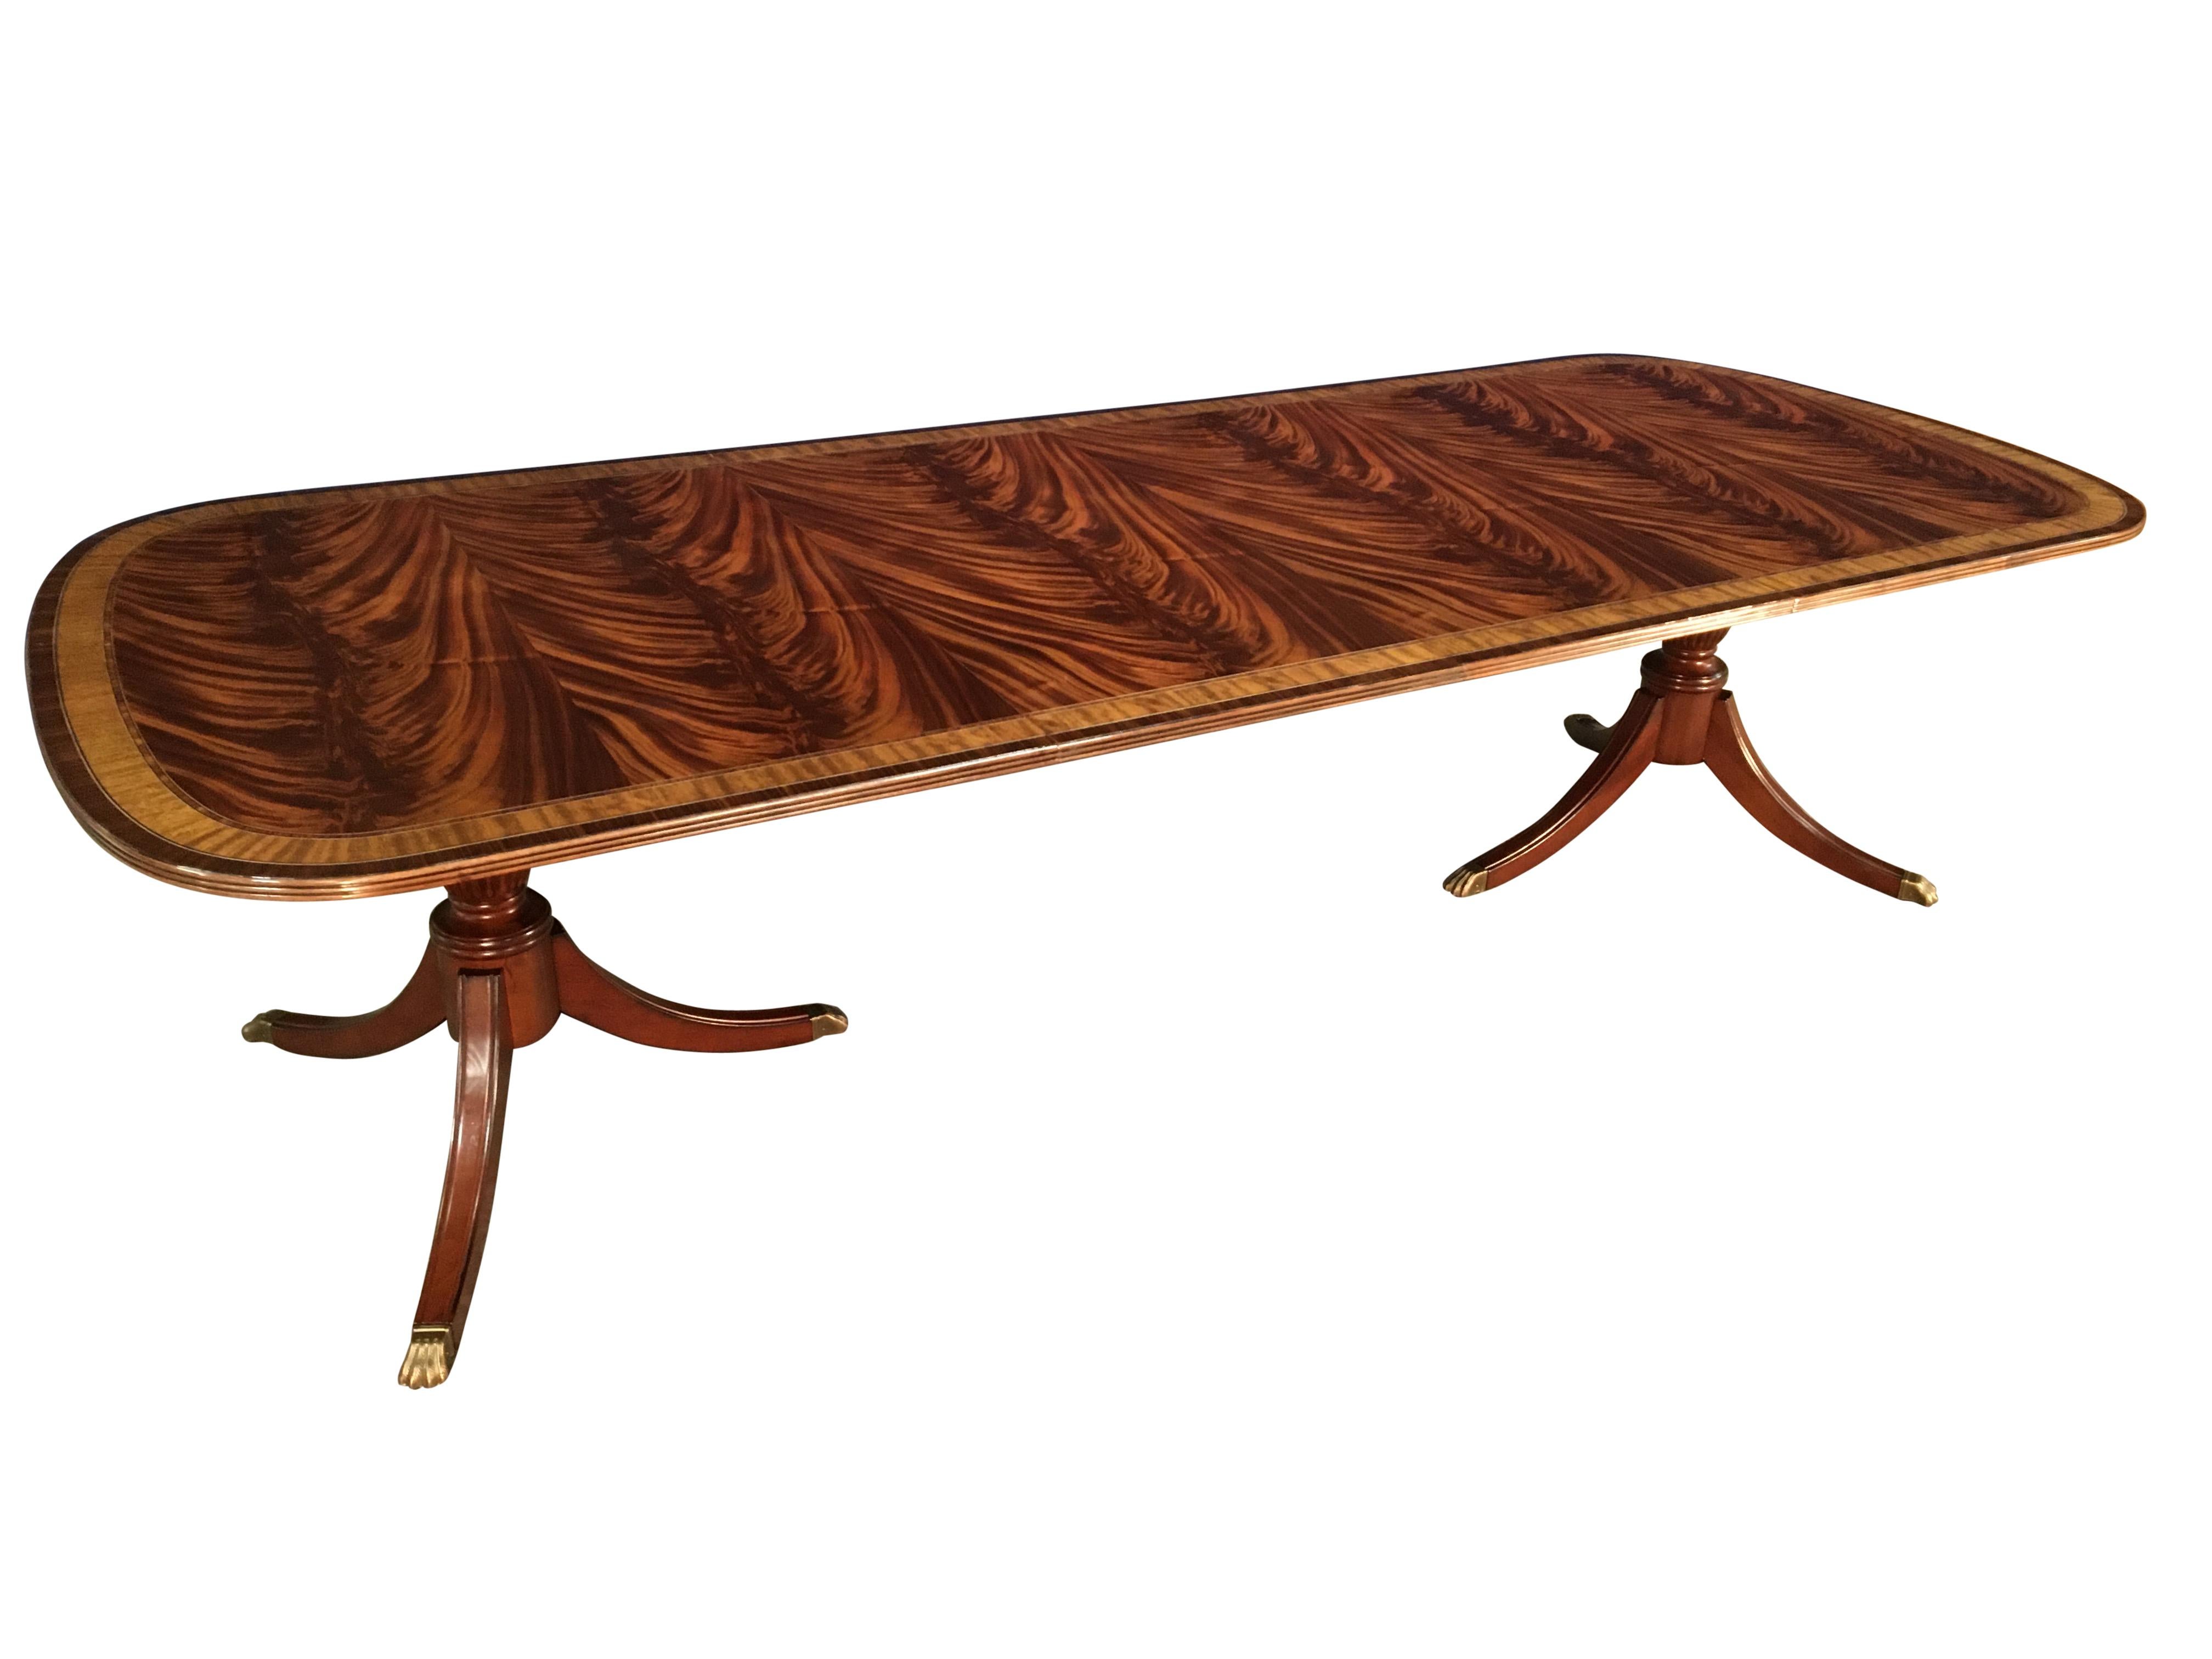 This is a made-to-order large traditional mahogany dining table made in the Leighton Hall shop. It features a field of slip-matched swirly crotch mahogany from West Africa and satinwood and Santos rosewood borders from South America. The borders are